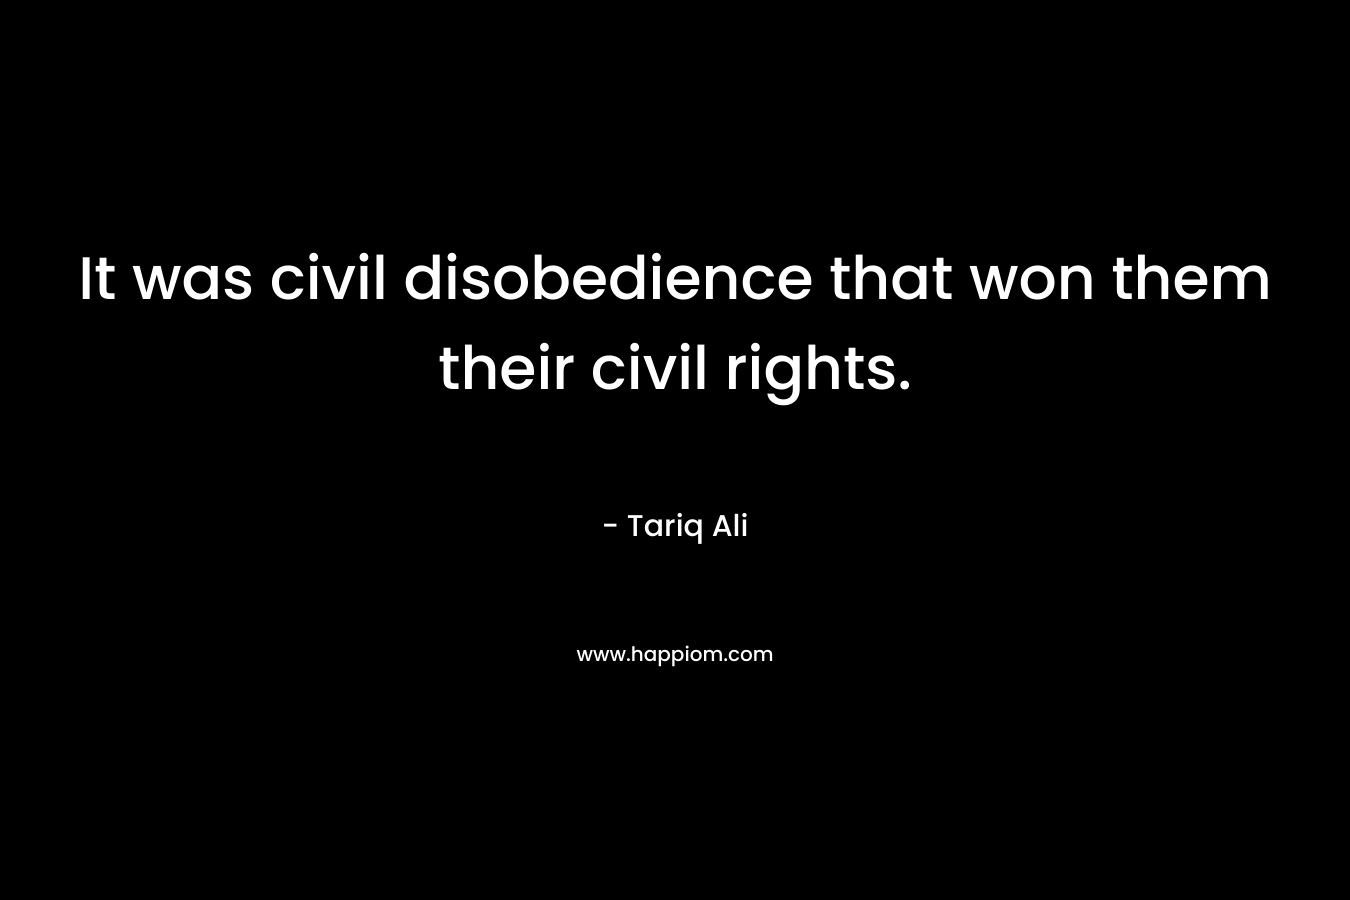 It was civil disobedience that won them their civil rights.